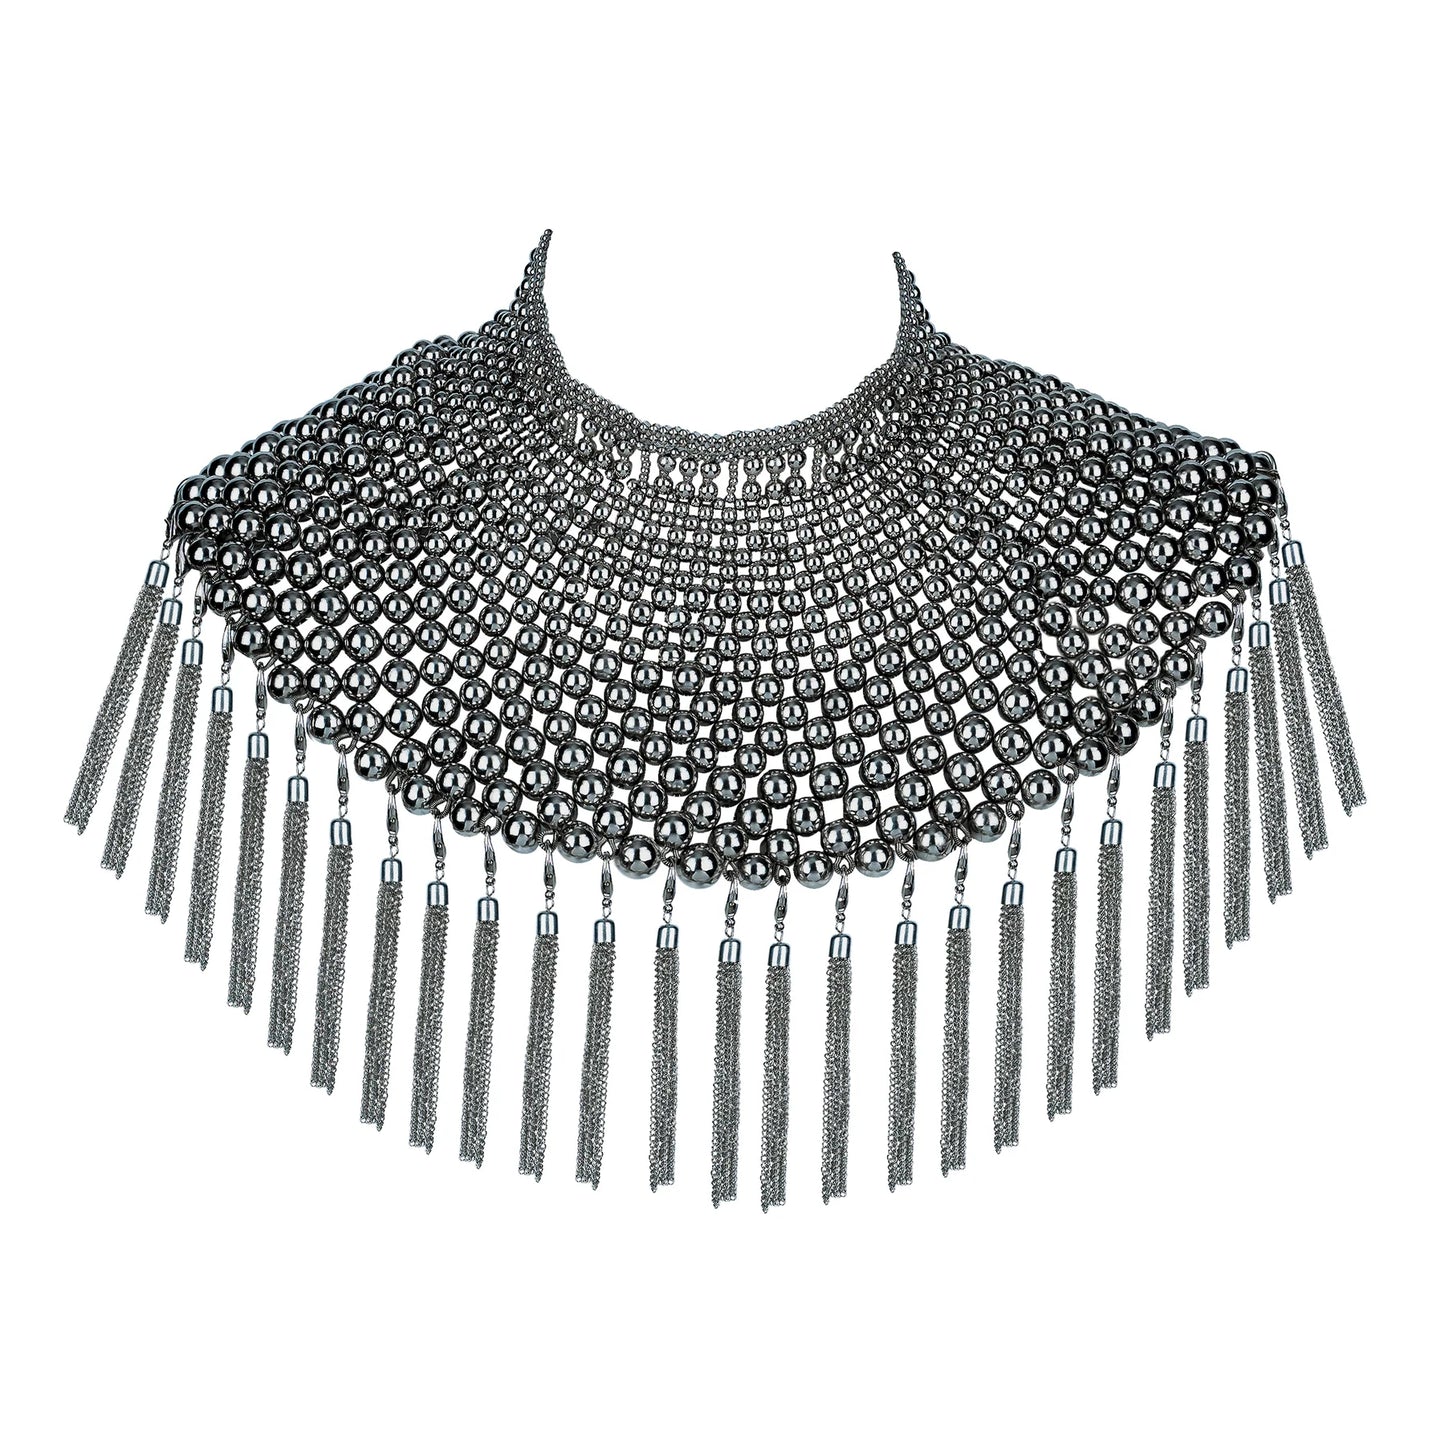 Namaka modular necklace w/removable metal tassels in silver